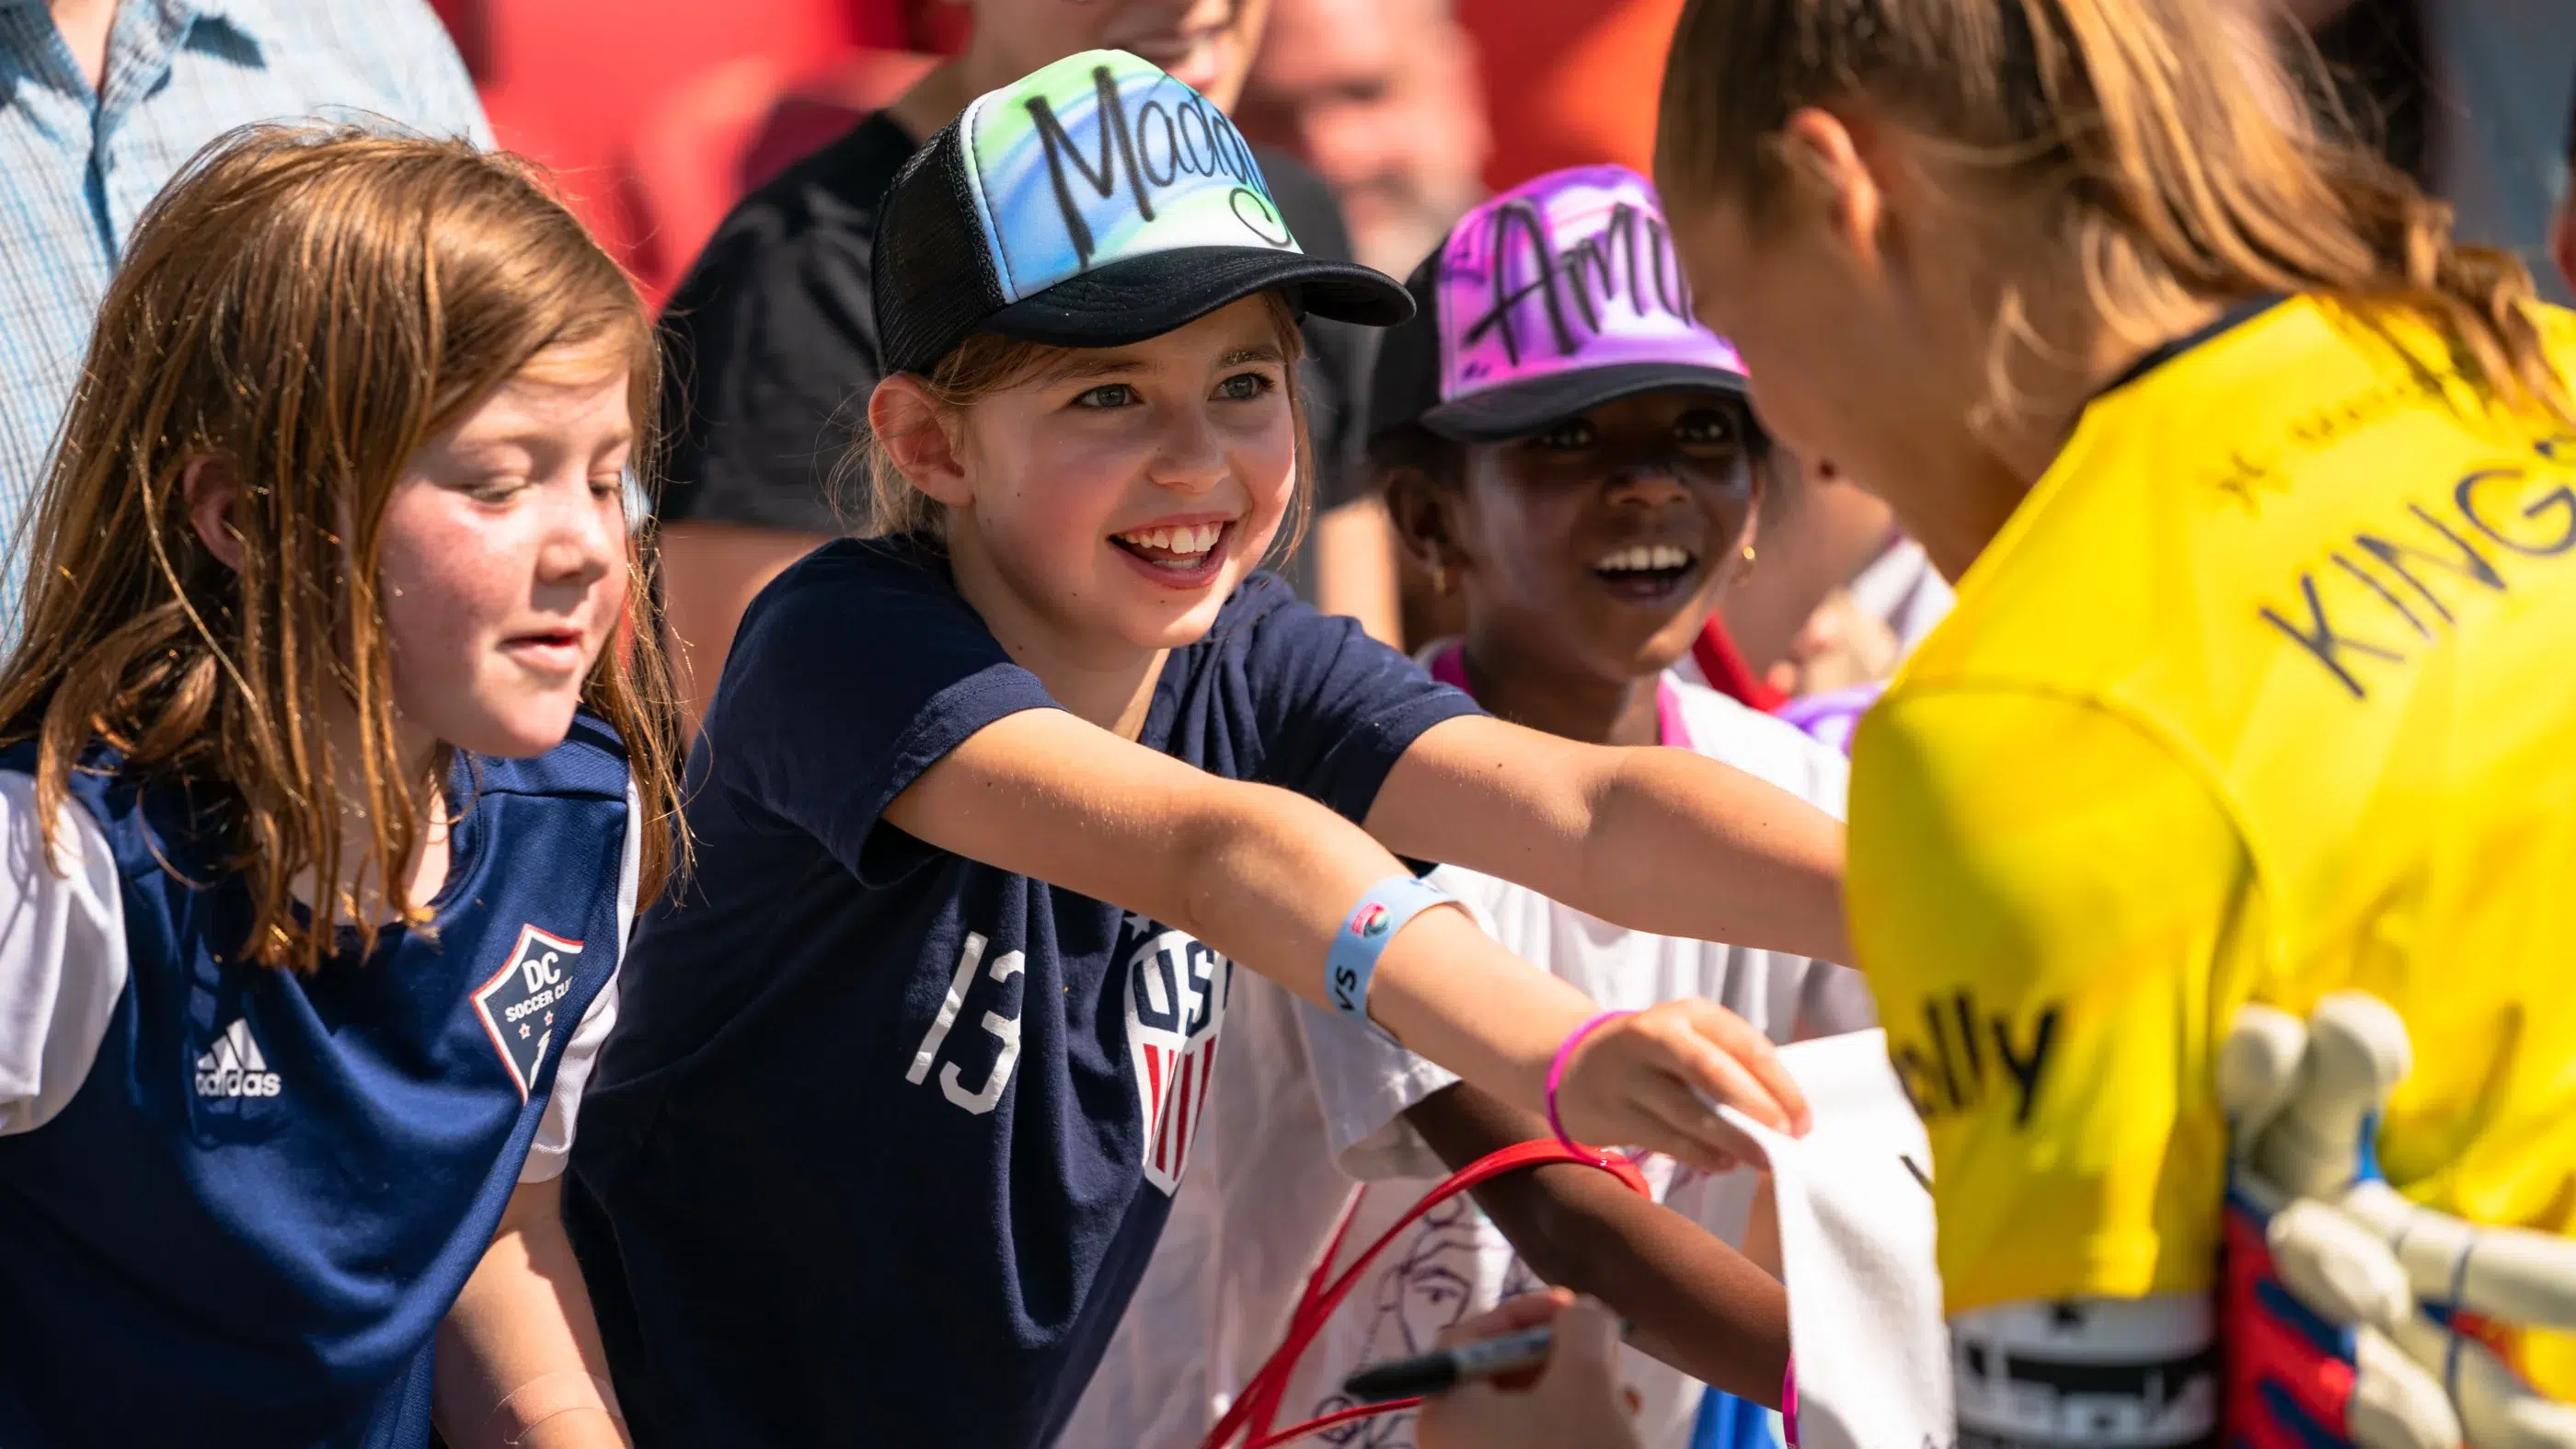 Washington Spirit’s June 10th Match Versus Angel City FC to Recognize Youth Soccer Night Featured Image